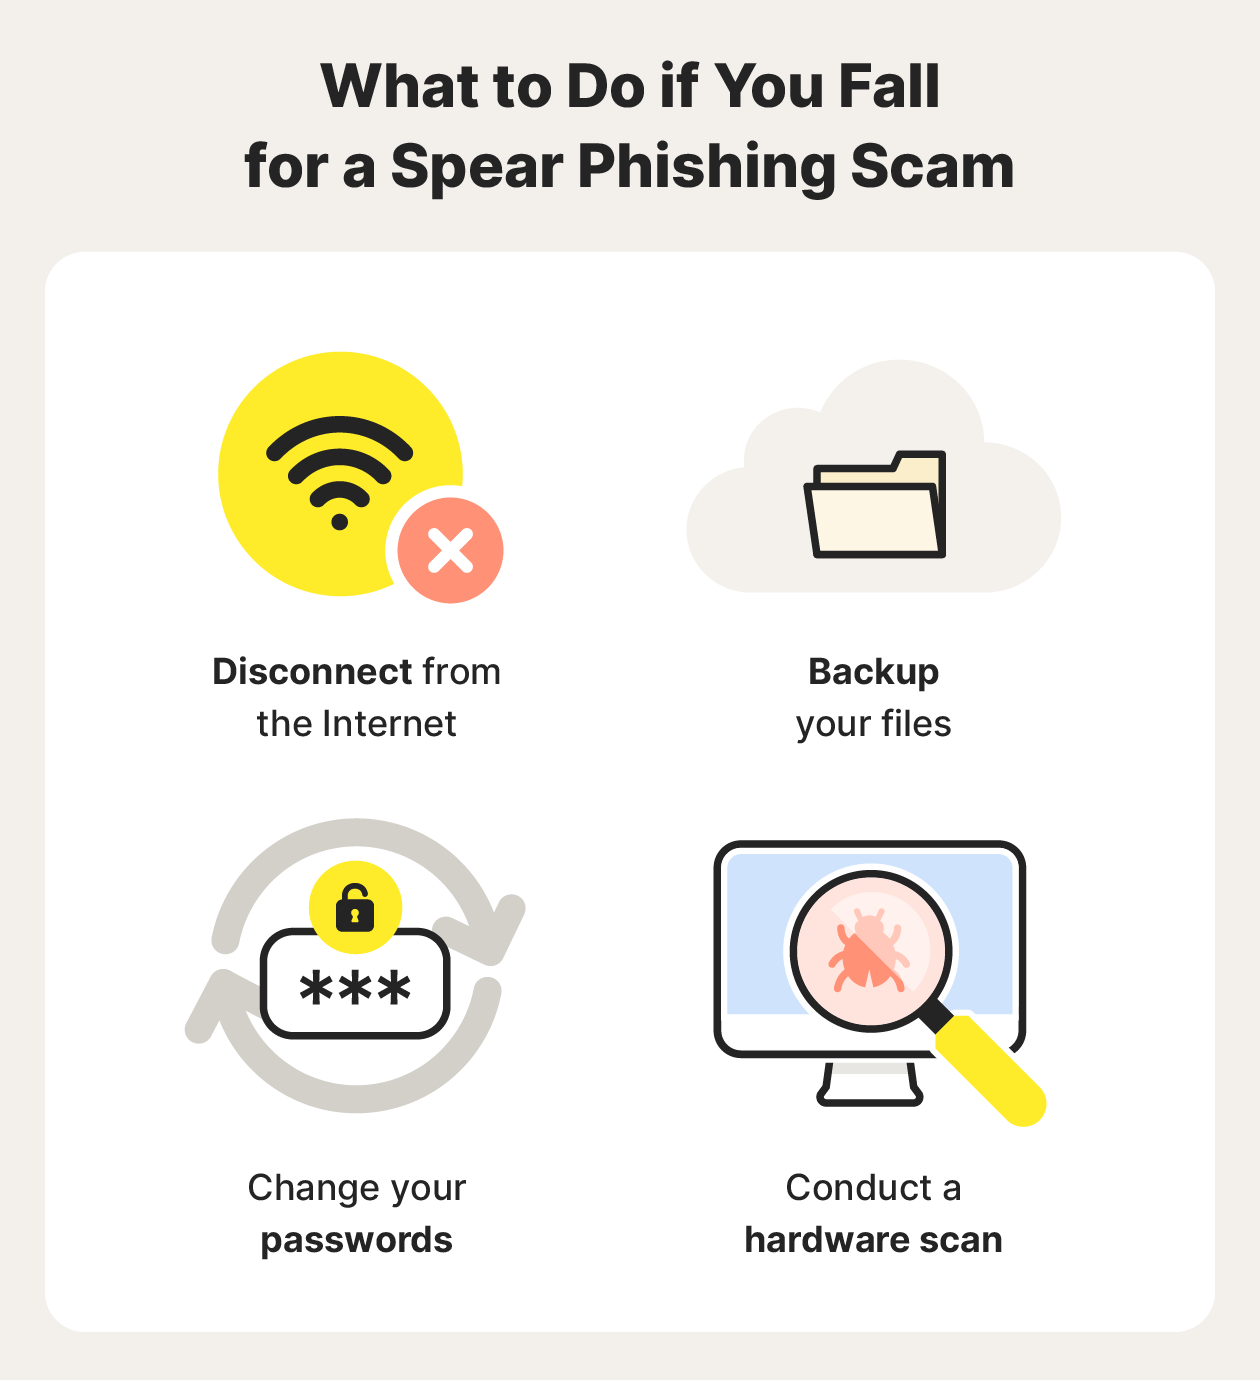 A graphic highlights the steps you should take if you fall victim to a spear phishing scam.